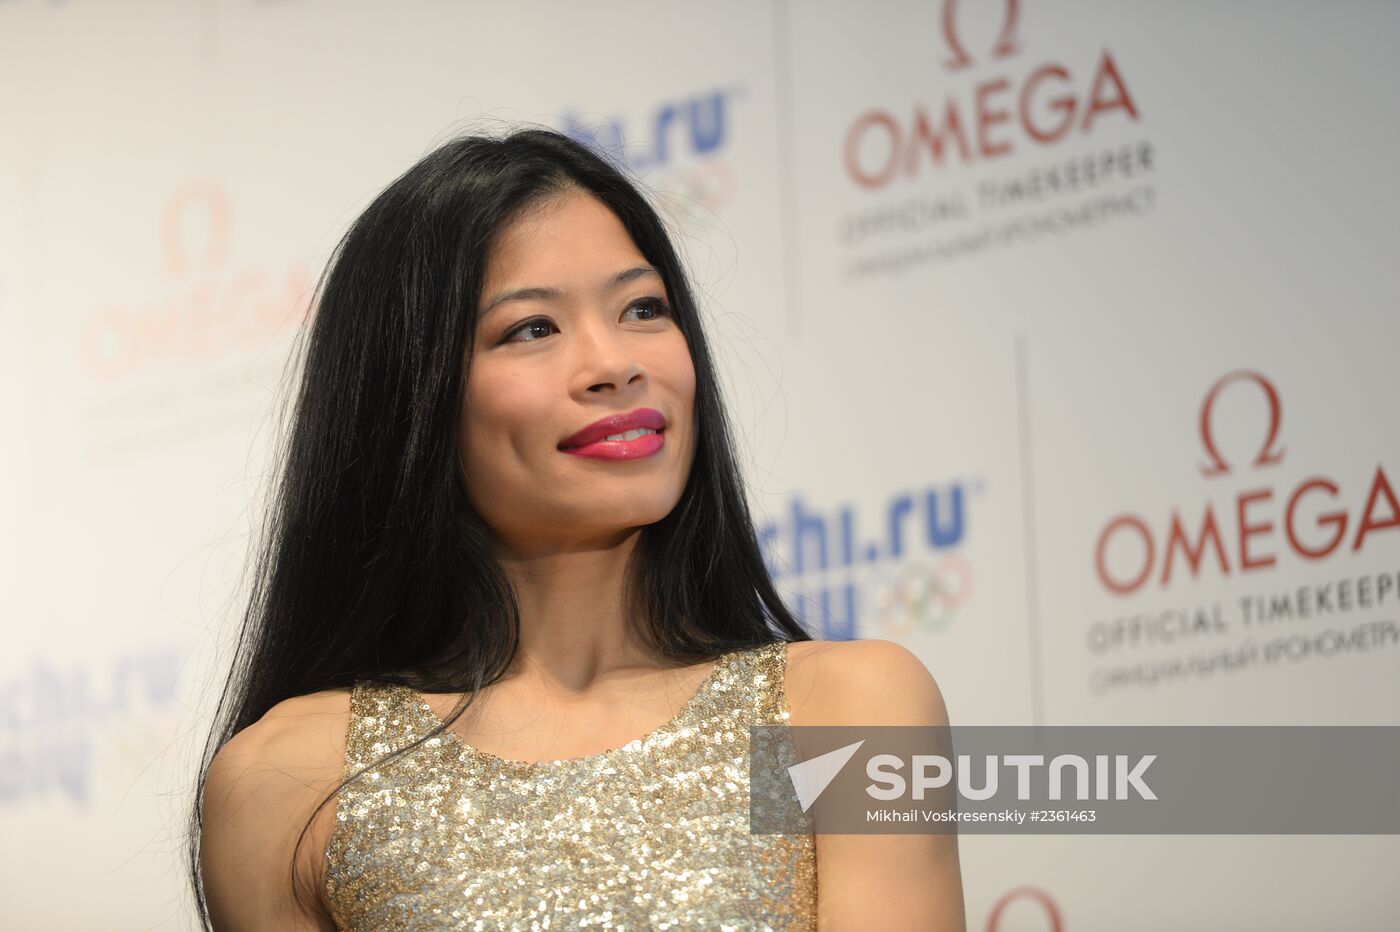 Vanessa-Mae visits Omega pavilion in Olympic Park